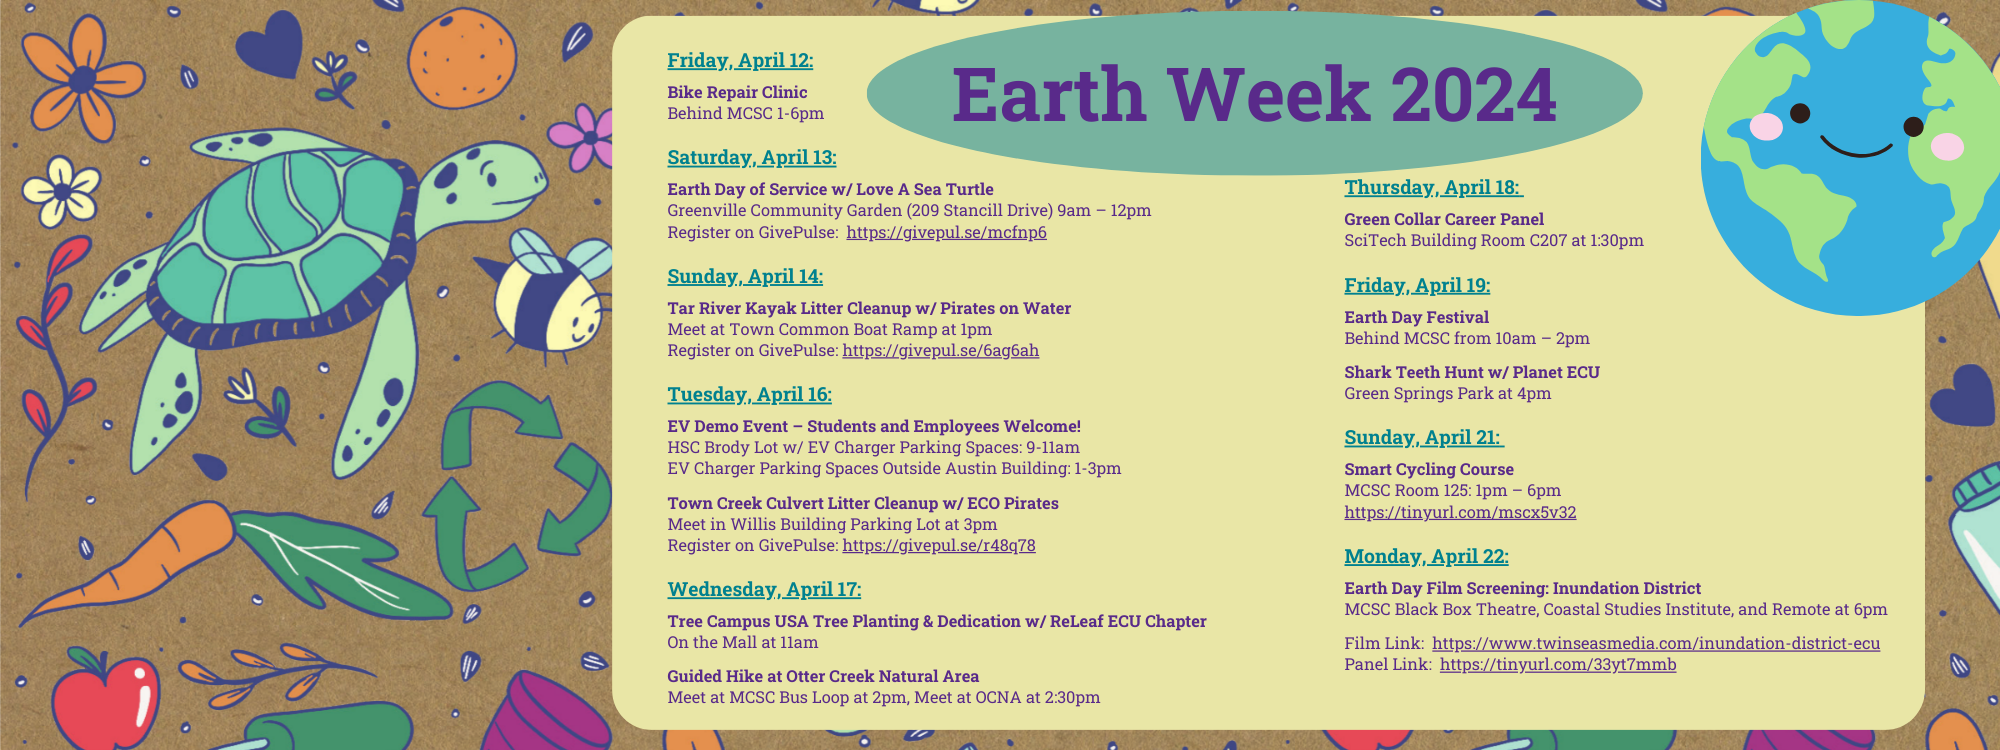 Earth Week 2024: Friday, April 12: Bike Repair Clinic Behind MCSC 1-6pm Saturday, April 13: Earth Day of Service w/ Love A Sea Turtle Greenville Community Garden (209 Stancill Drive) 9am – 12pm Register on GivePulse: https://givepul.se/mcfnp6 Sunday, April 14: Tar River Kayak Litter Cleanup w/ Pirates on Water Meet at Town Common Boat Ramp at 1pm Register on GivePulse: https://givepul.se/6ag6ah Tuesday, April 16: EV Demo Event – Students and Employees Welcome! HSC Brody Lot w/ EV Charger Parking Spaces: 9-11am EV Charger Parking Spaces Outside Austin Building: 1-3pm Town Creek Culvert Litter Cleanup w/ ECO Pirates Meet in Willis Building Parking Lot at 3pm Register on GivePulse: https://givepul.se/r48q78 Wednesday, April 17: Tree Campus USA Tree Planting & Dedication w/ ReLeaf ECU Chapter On the Mall at 11am Guided Hike at Otter Creek Natural Area Meet at MCSC Bus Loop at 2pm, Meet at OCNA at 2:30pm Thursday, April 18: Green Collar Career Panel SciTech Building Room C207 at 1:30pm Friday, April 19: Earth Day Festival Behind MCSC from 10am – 2pm Shark Teeth Hunt w/ Planet ECU Green Springs Park at 4pm Sunday, April 21: Smart Cycling Course MCSC Room 125: 1pm – 6pm https://tinyurl.com/mscx5v32 Monday, April 22: Earth Day Film Screening: Inundation District MCSC Black Box Theatre, Coastal Studies Institute, and Remote at 6pm Film Link: https://www.twinseasmedia.com/inundation-district-ecu Panel Link: https://tinyurl.com/33yt7mmb